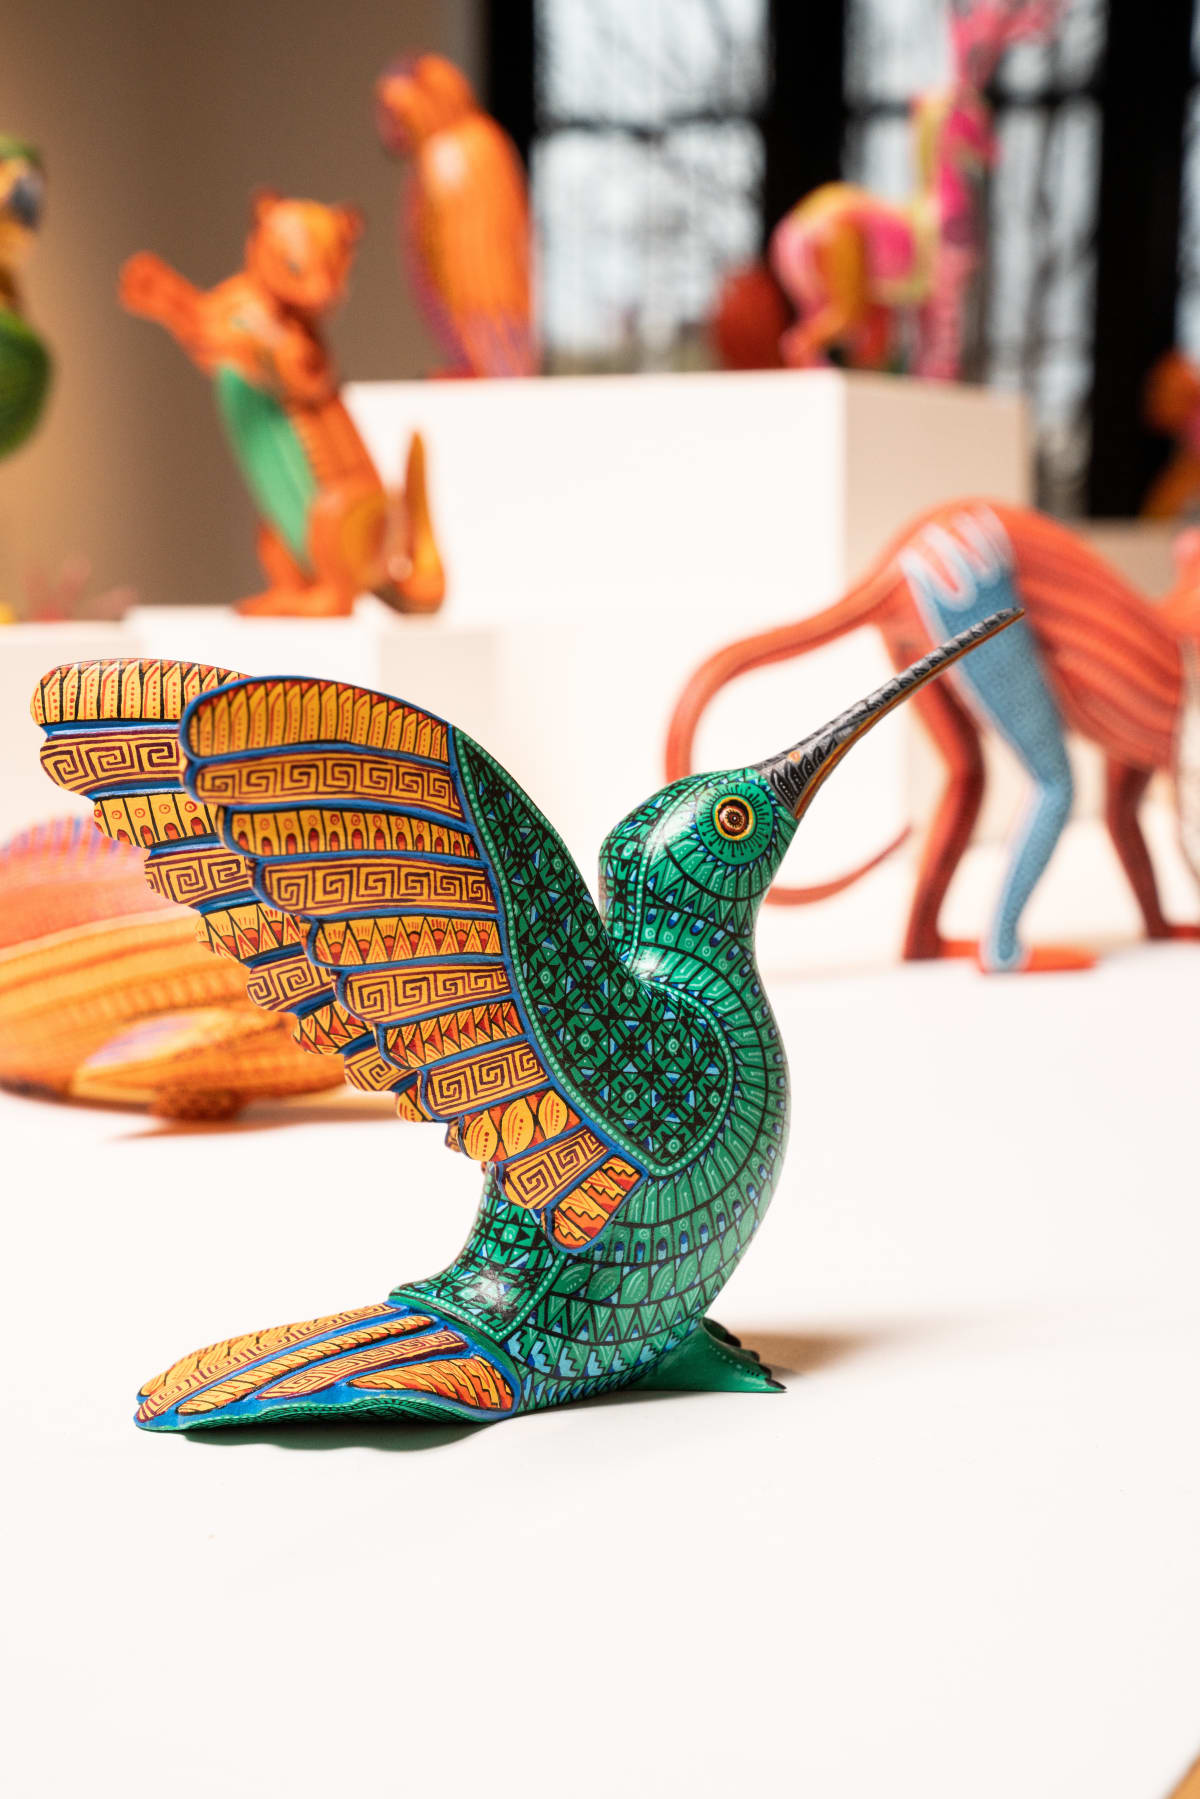 'Vibrant Patterns Envelop Dozens of Mythical Animal Sculptures That Explore the Folk Art Traditions of Mexico'